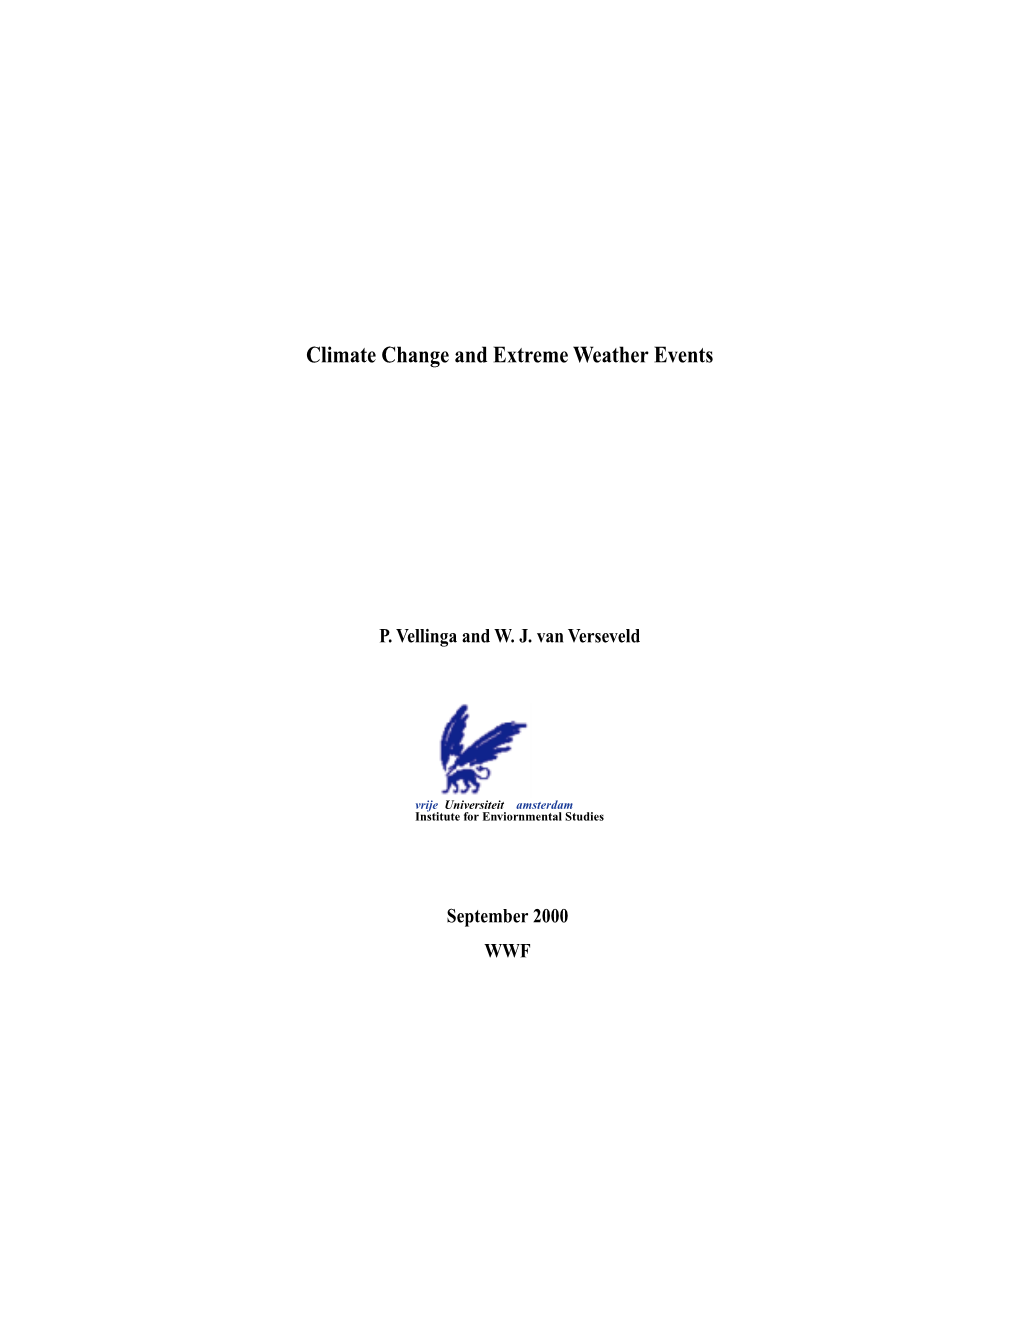 Climate Change and Extreme Weather Events Journal of Reinsurance 1(2):59-72